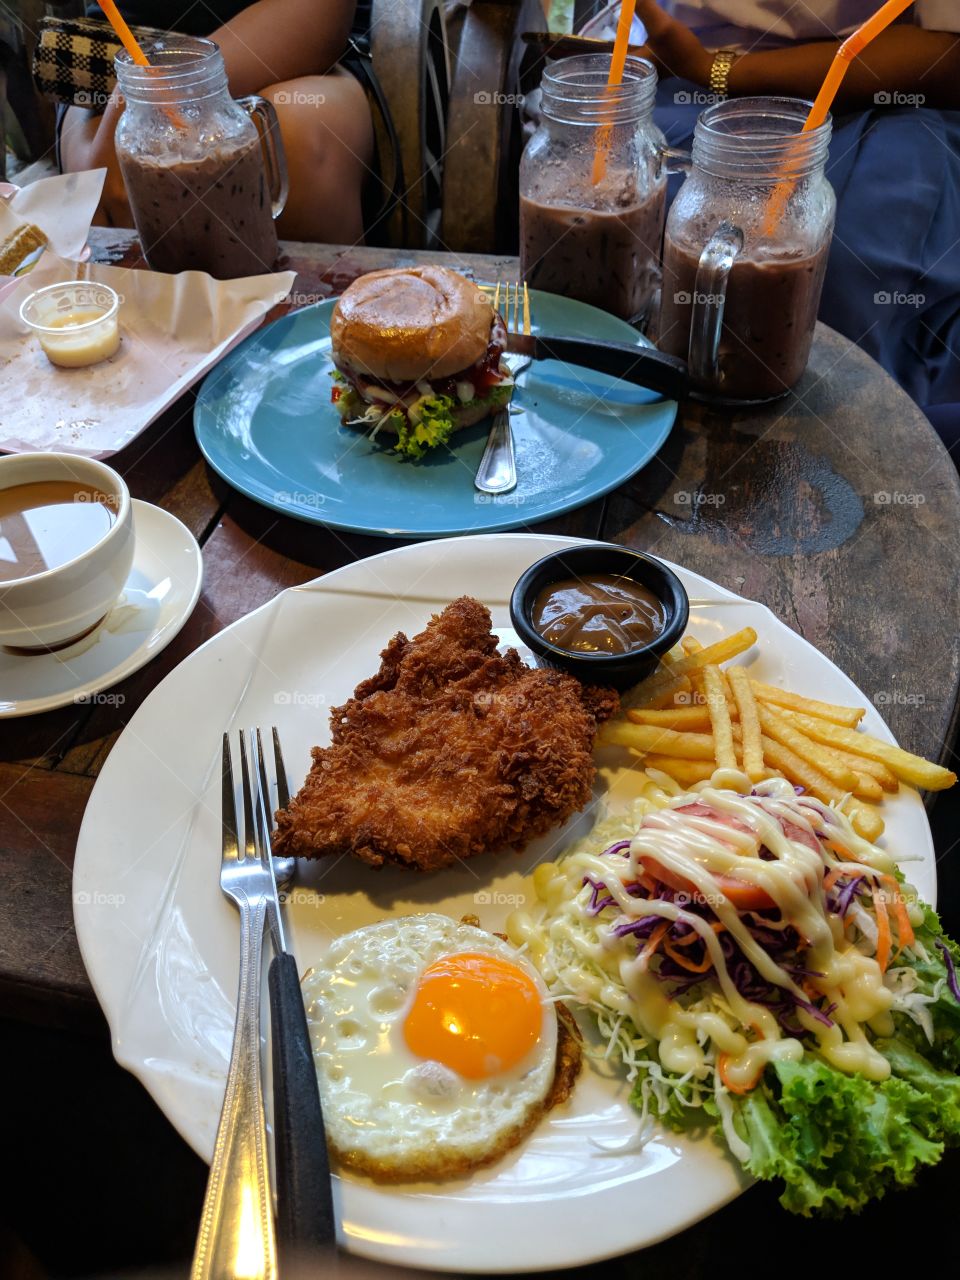 Fried Chicken Steak with egg and fries also salad